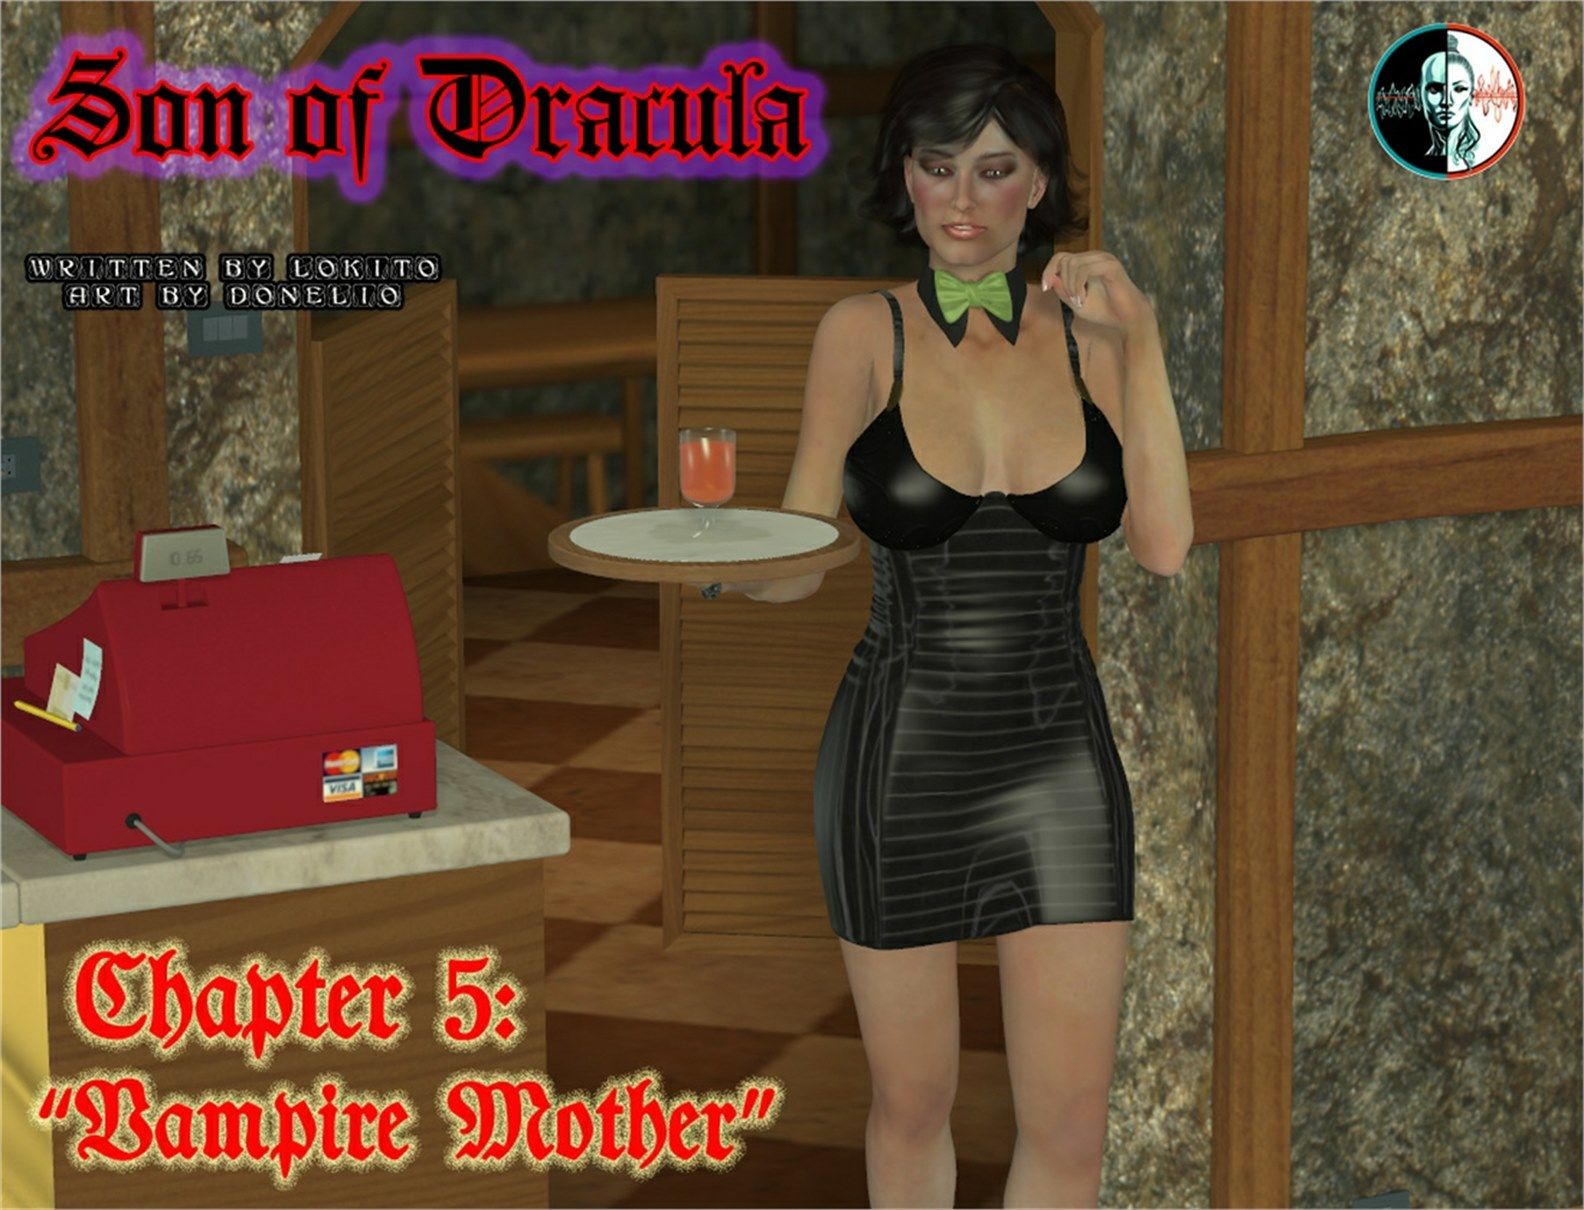 Son of Dracula 5 page 1